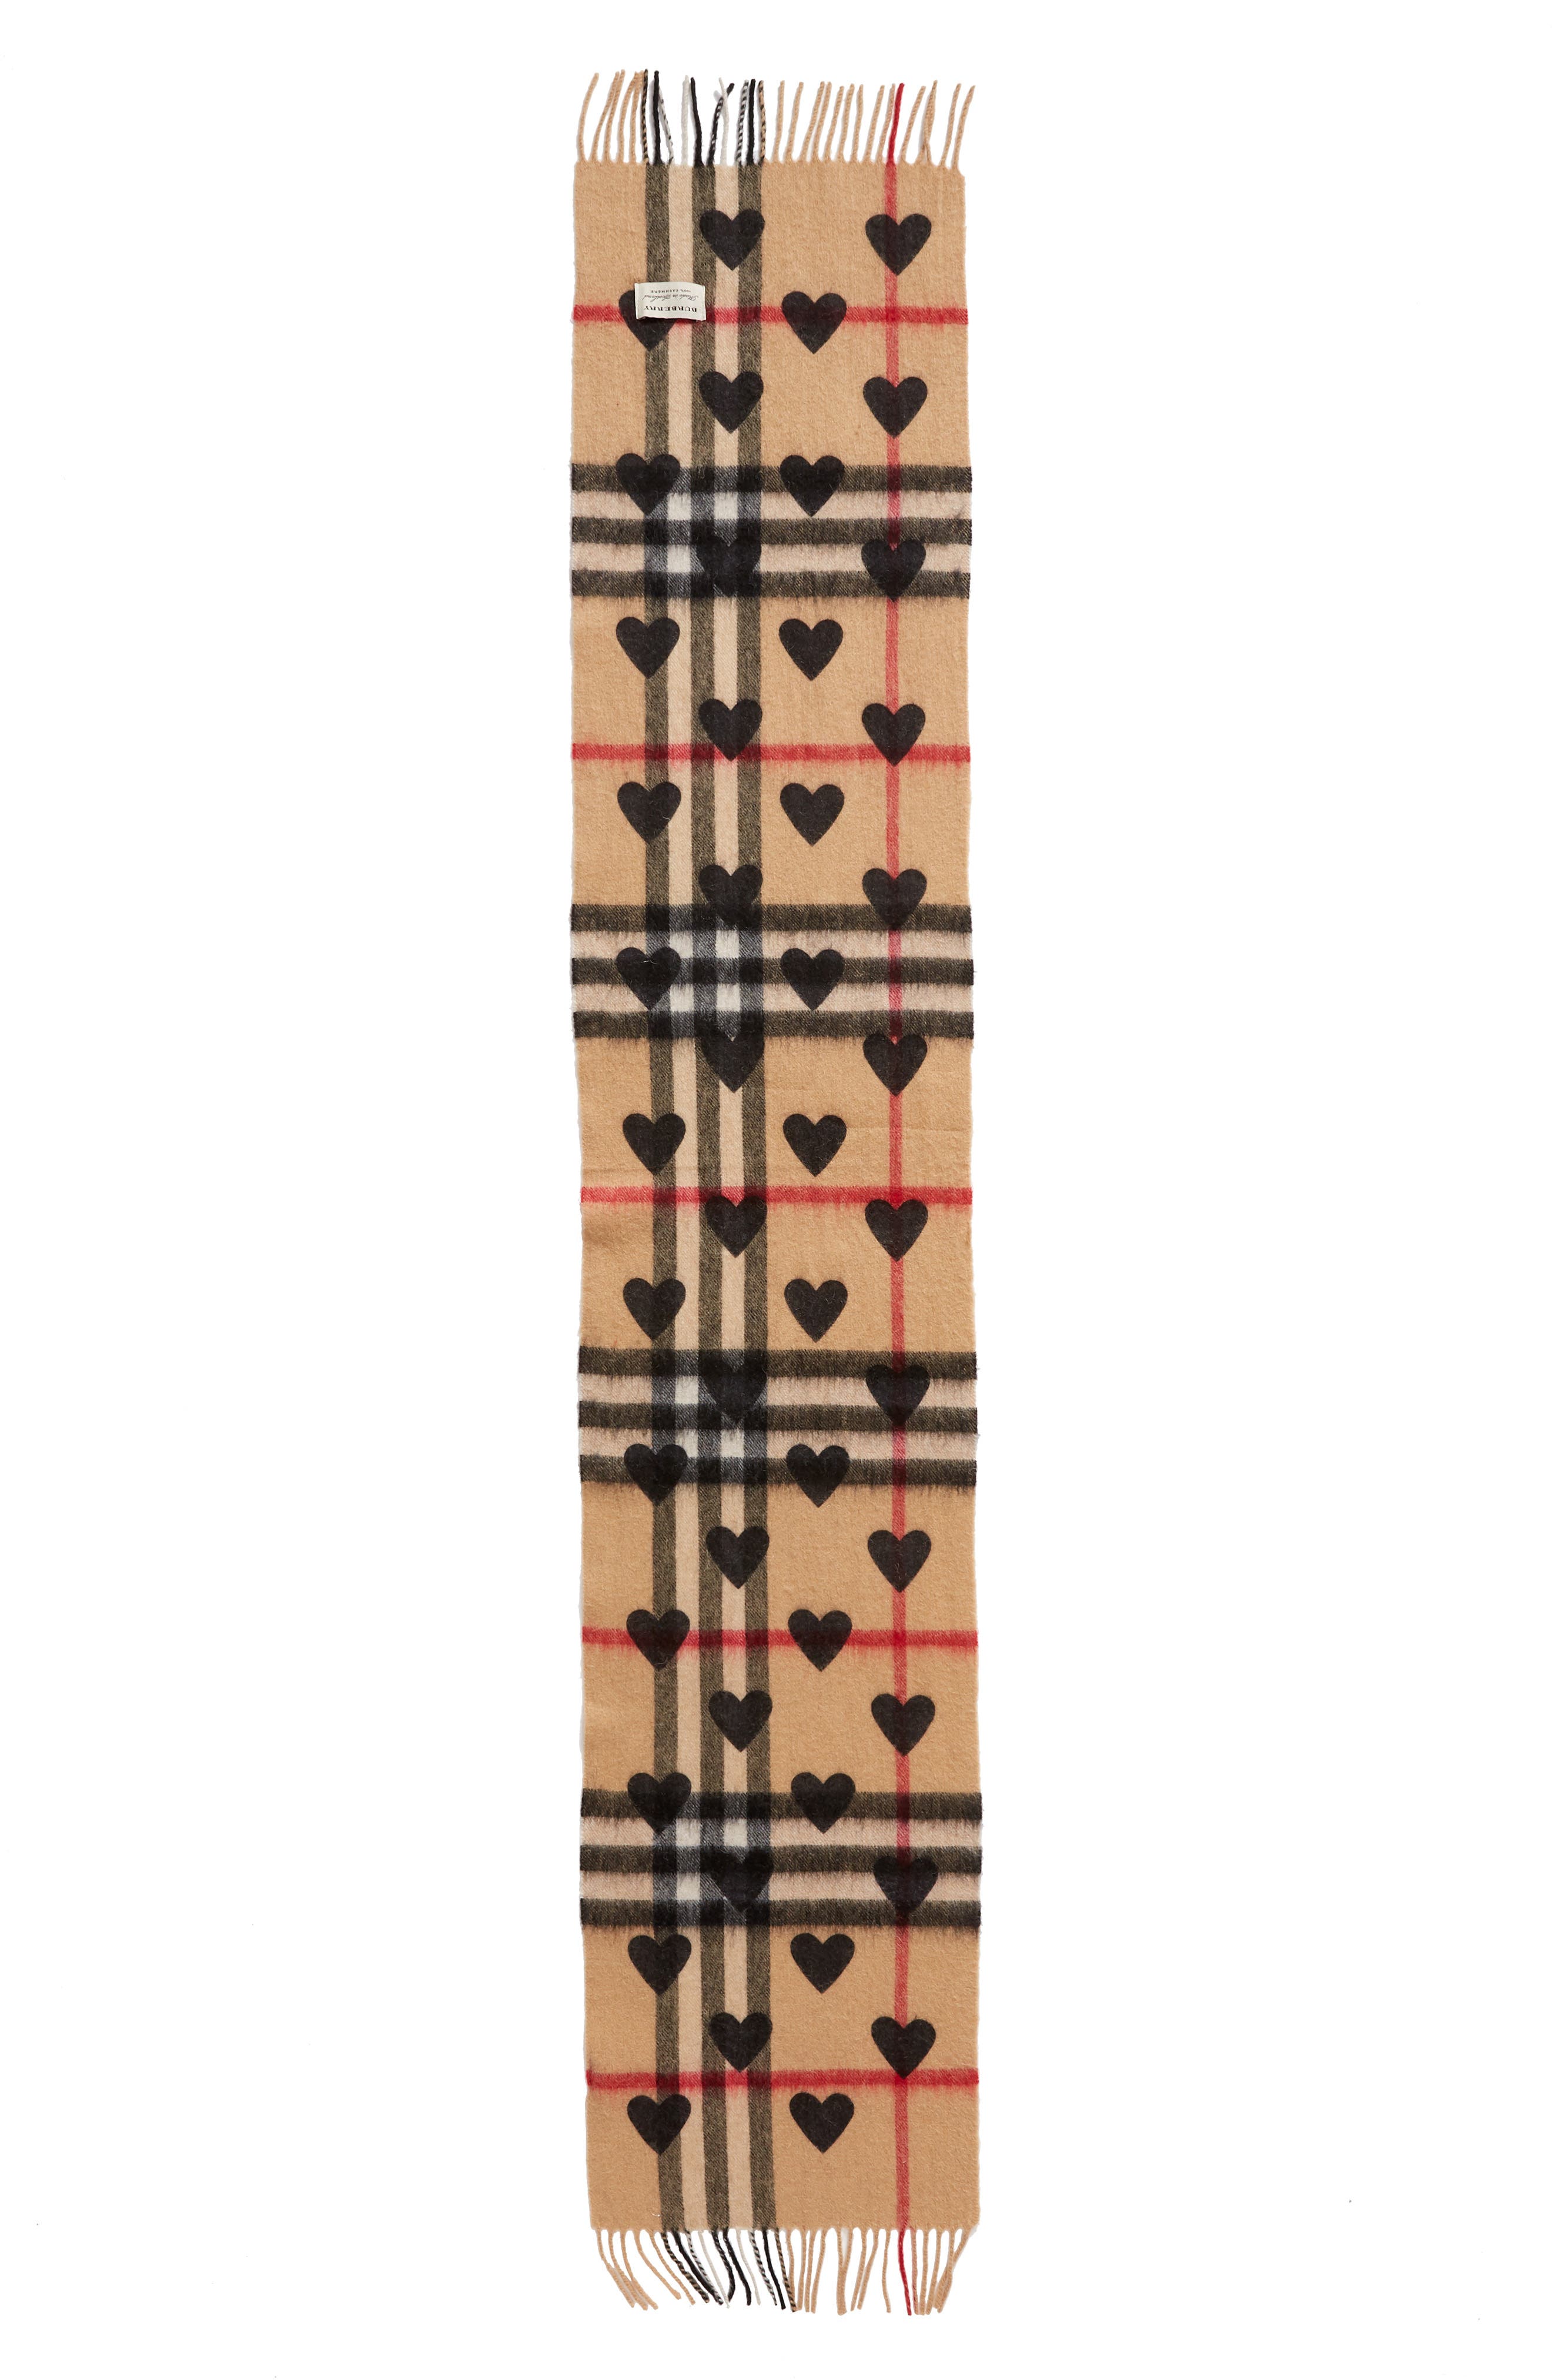 burberry scarf with hearts